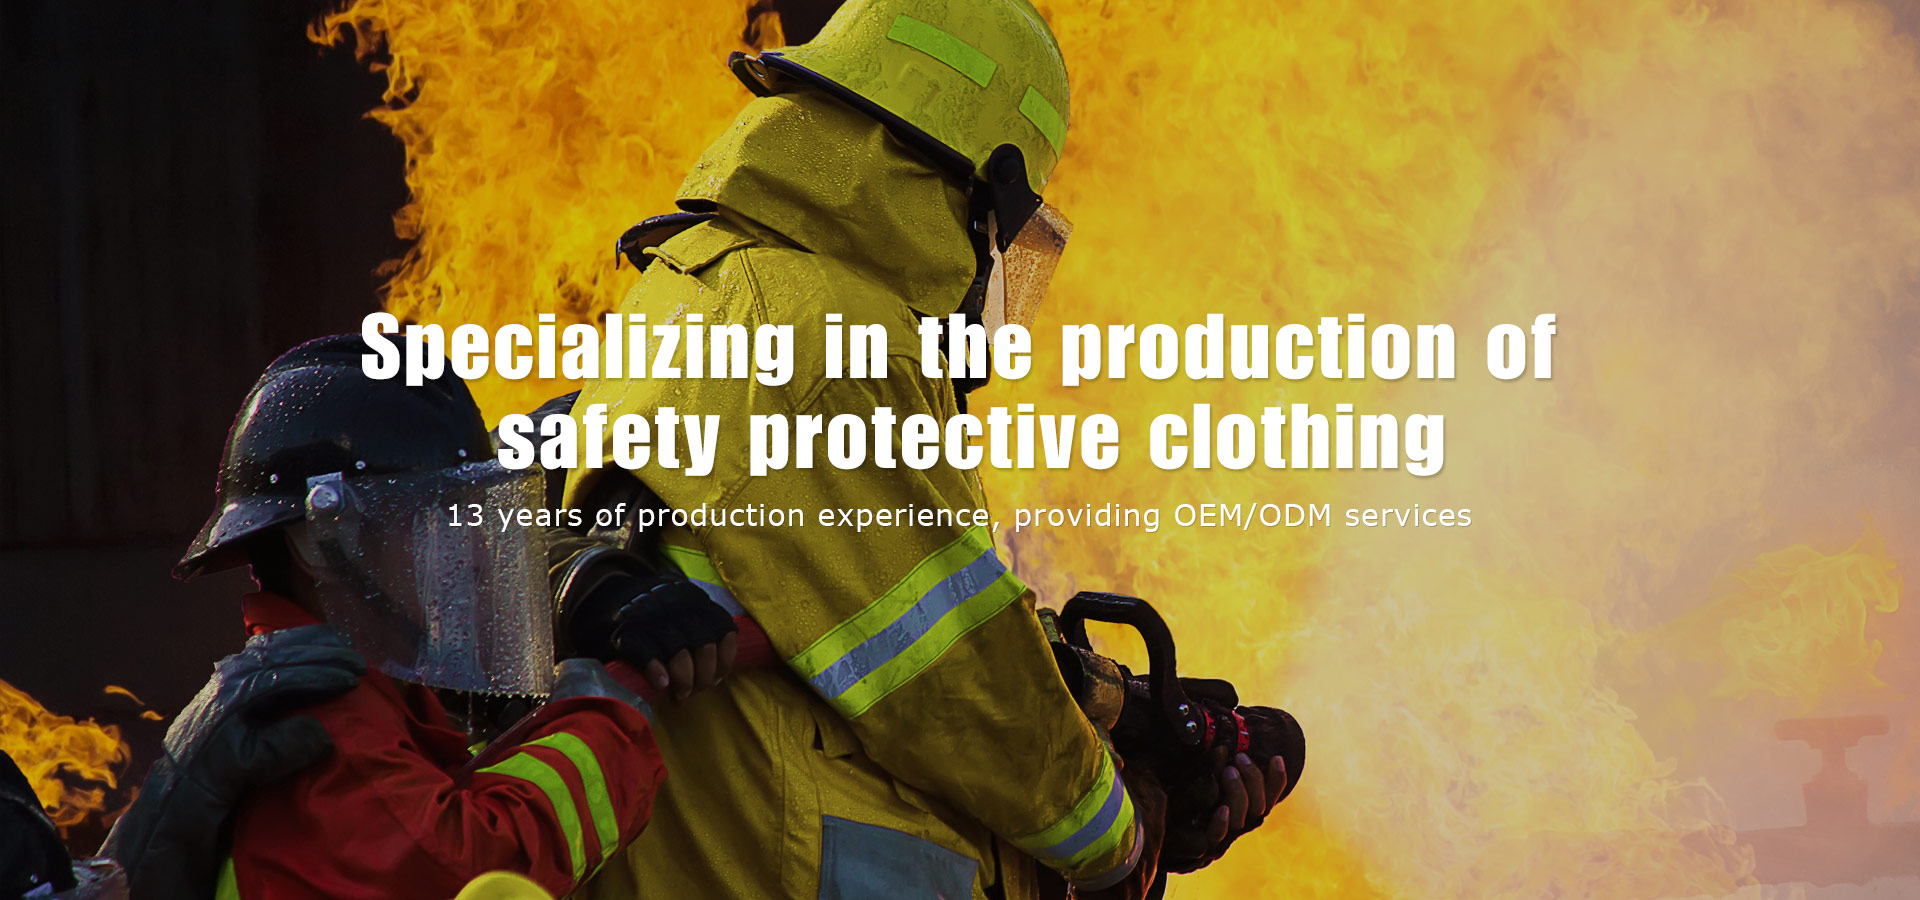 Specializeng in the production of safety protective clothing